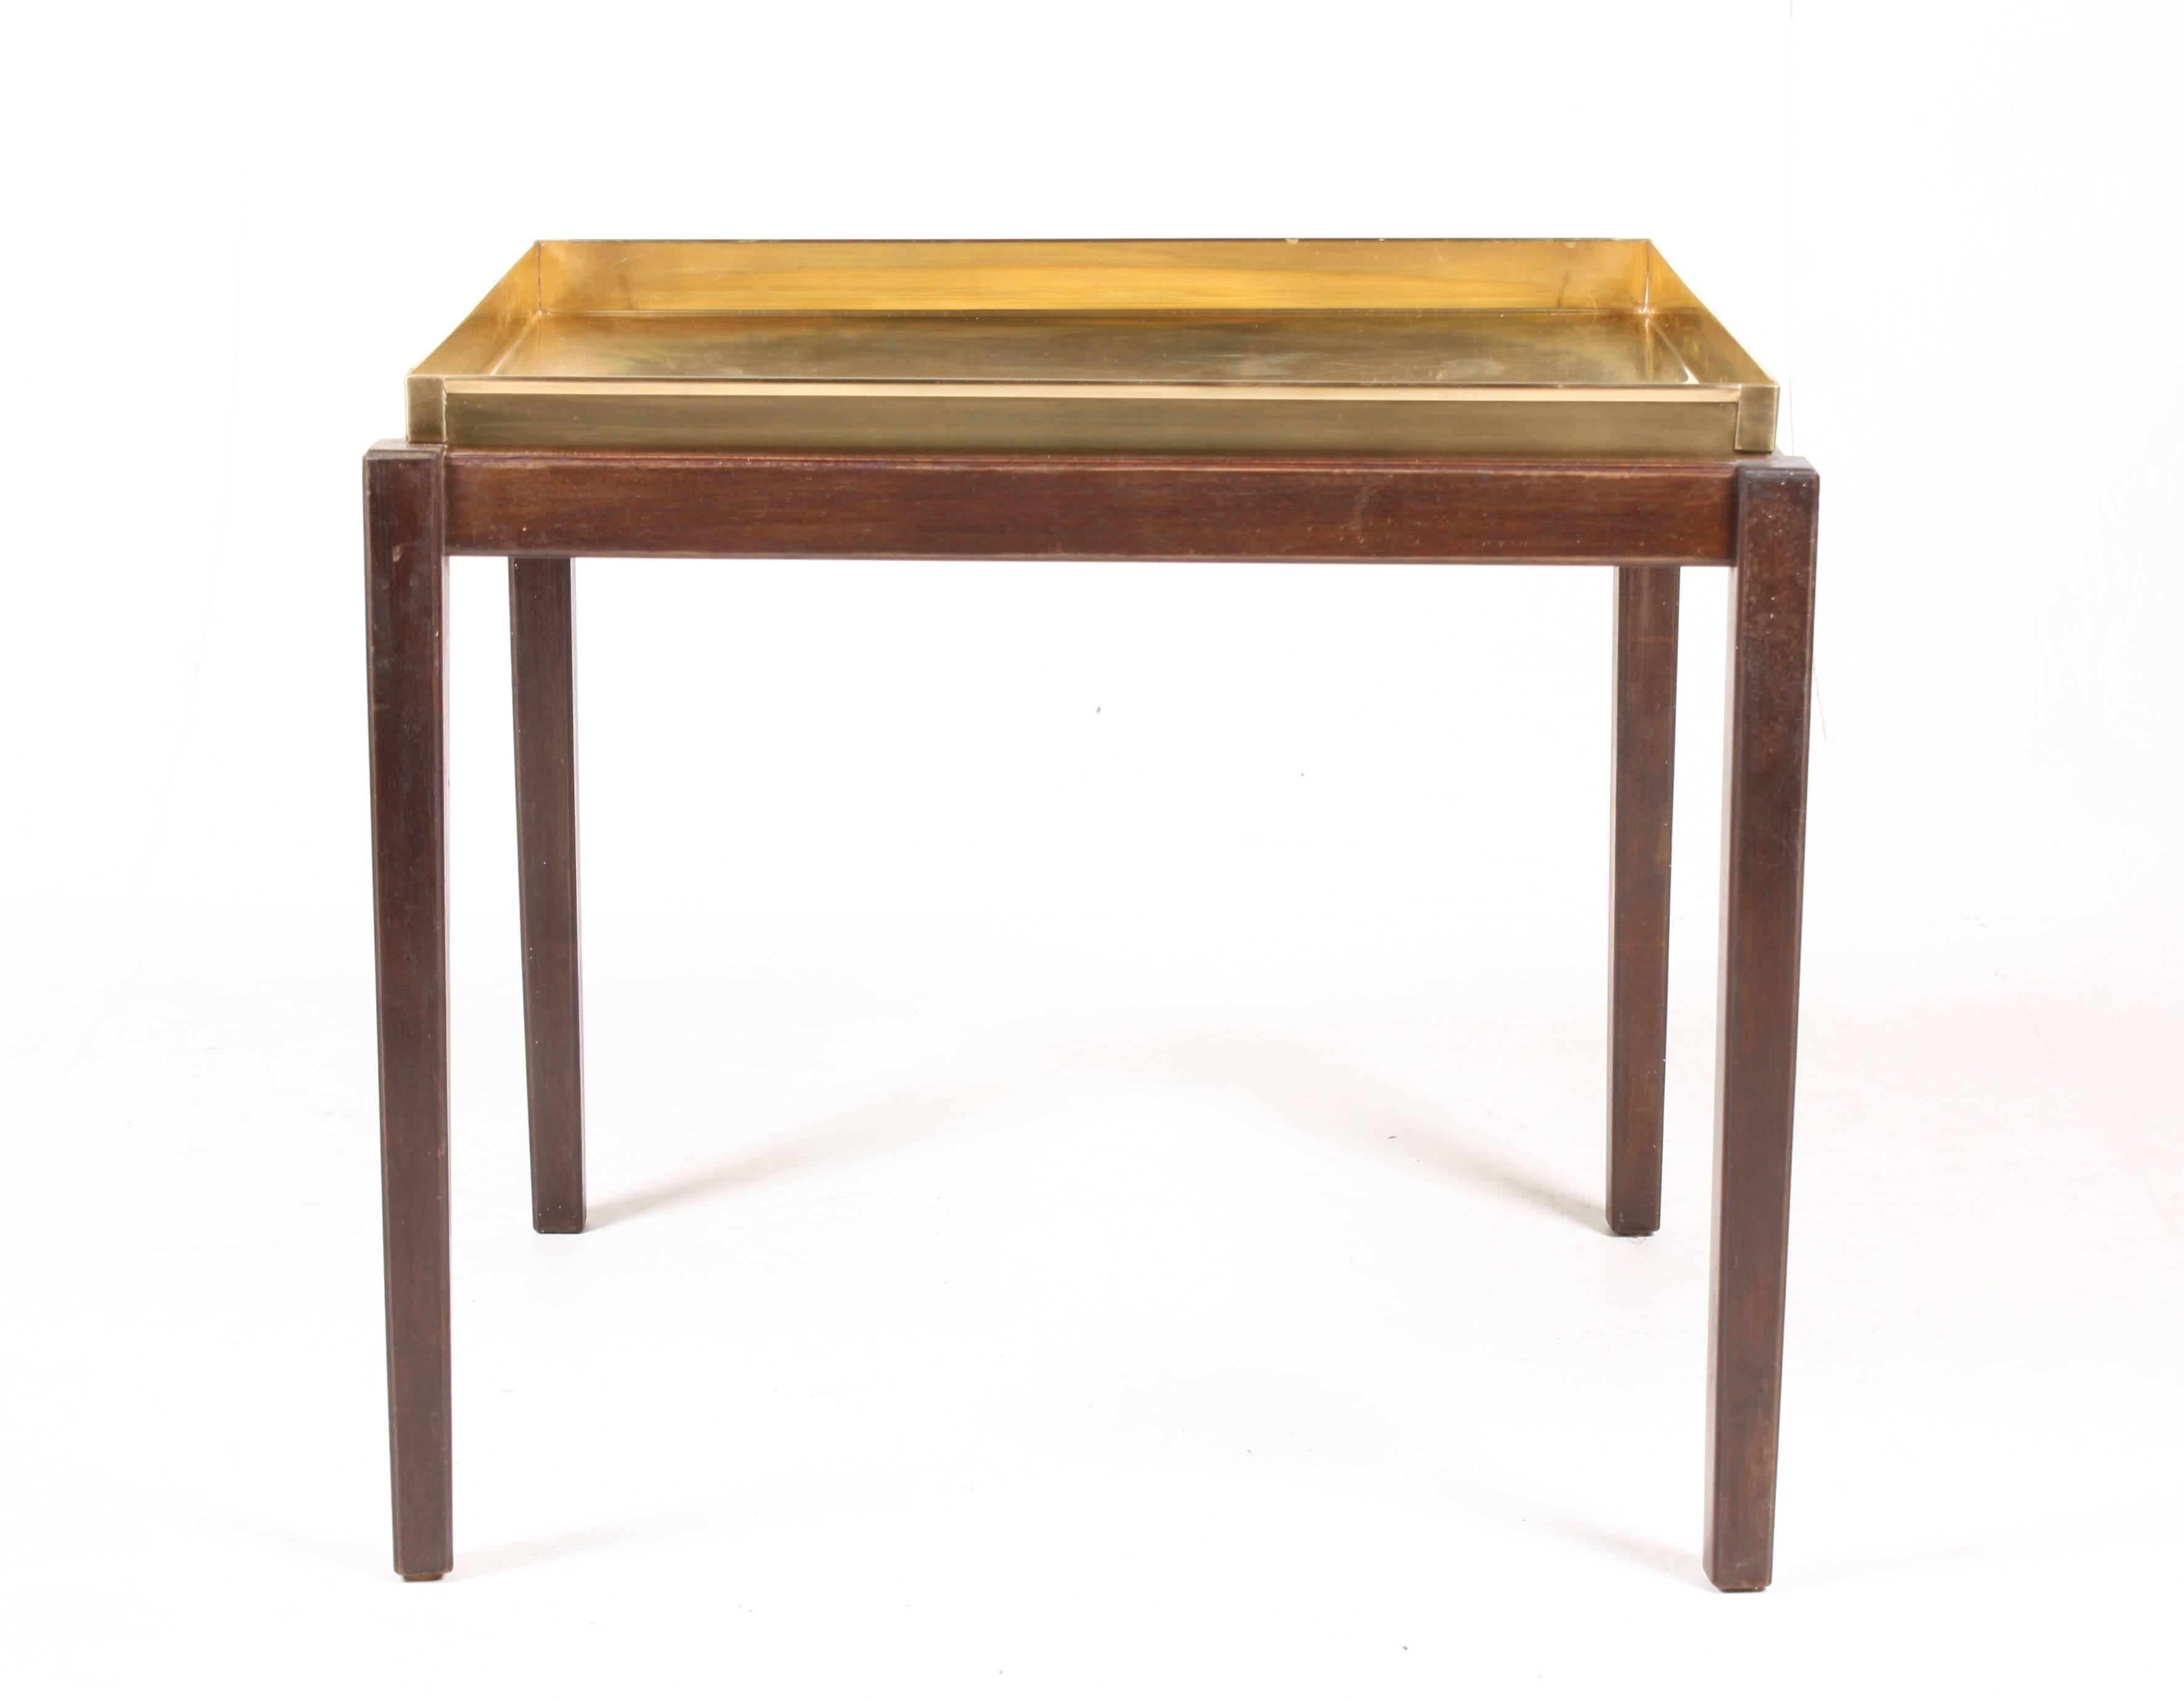 Side table in mahogany and brass. Made in Denmark in the 1960s. Great condition.